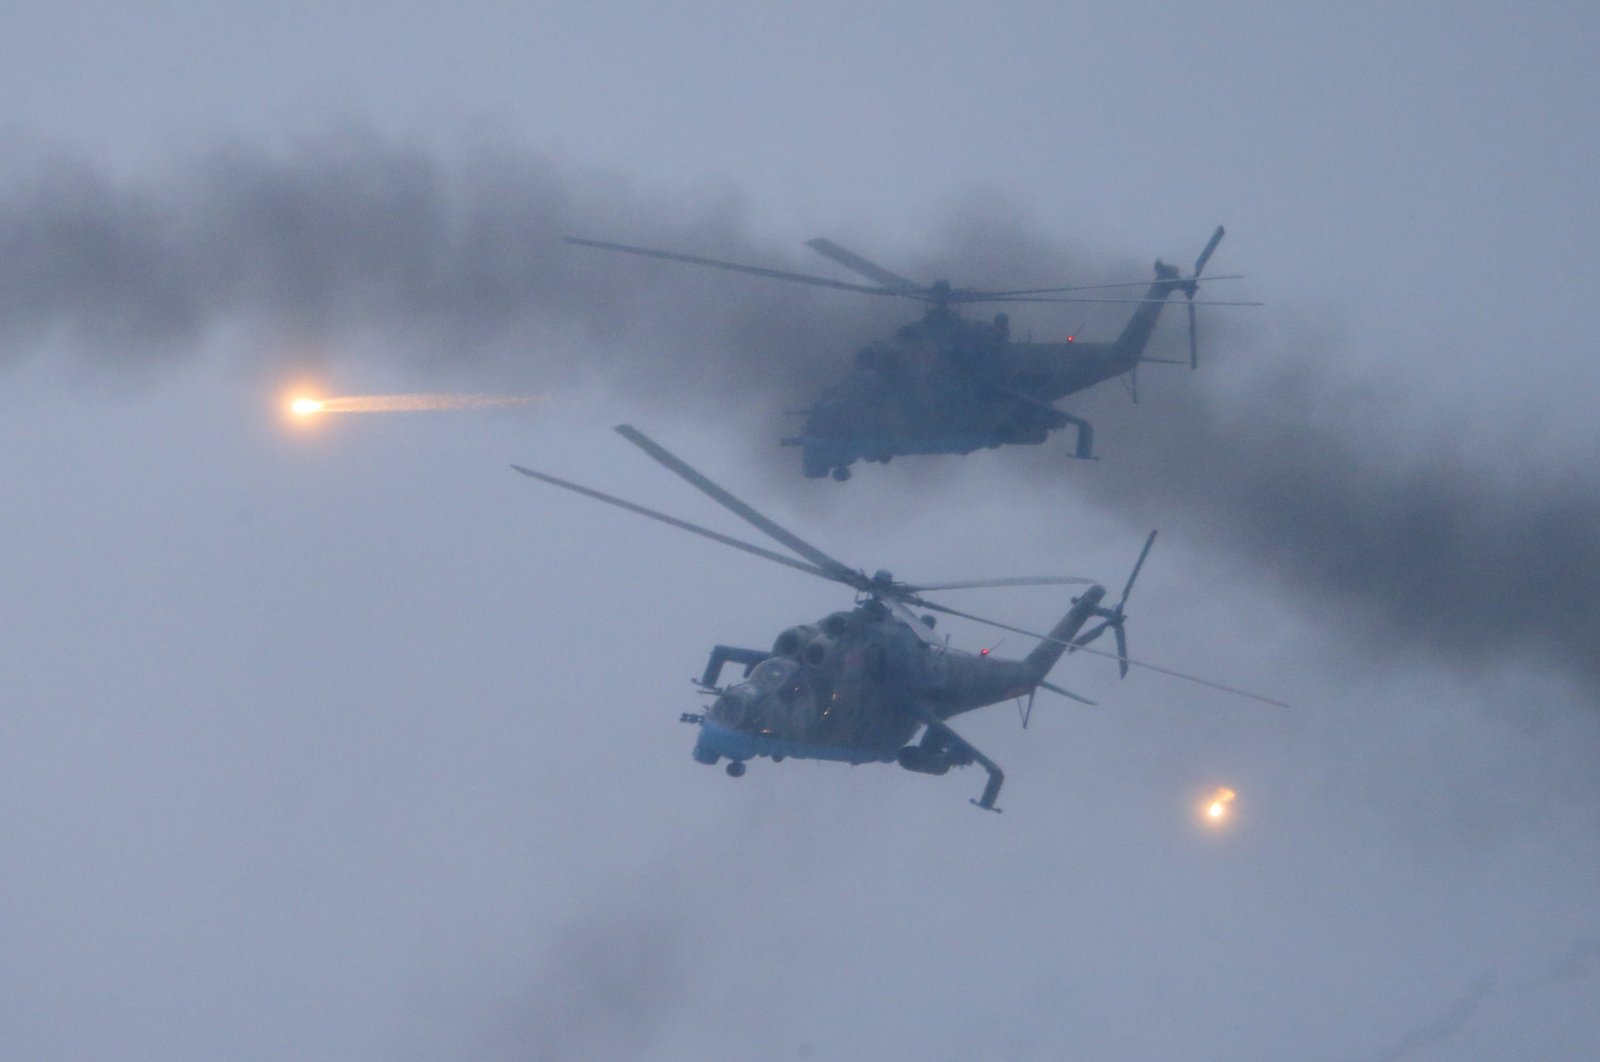 Military helicopters fly over the Osipovichi training ground during the Union Courage-2022 Russia-Belarus military drills near Osipovichi, Belarus, Feb. 17, 2022. (AP Photo)